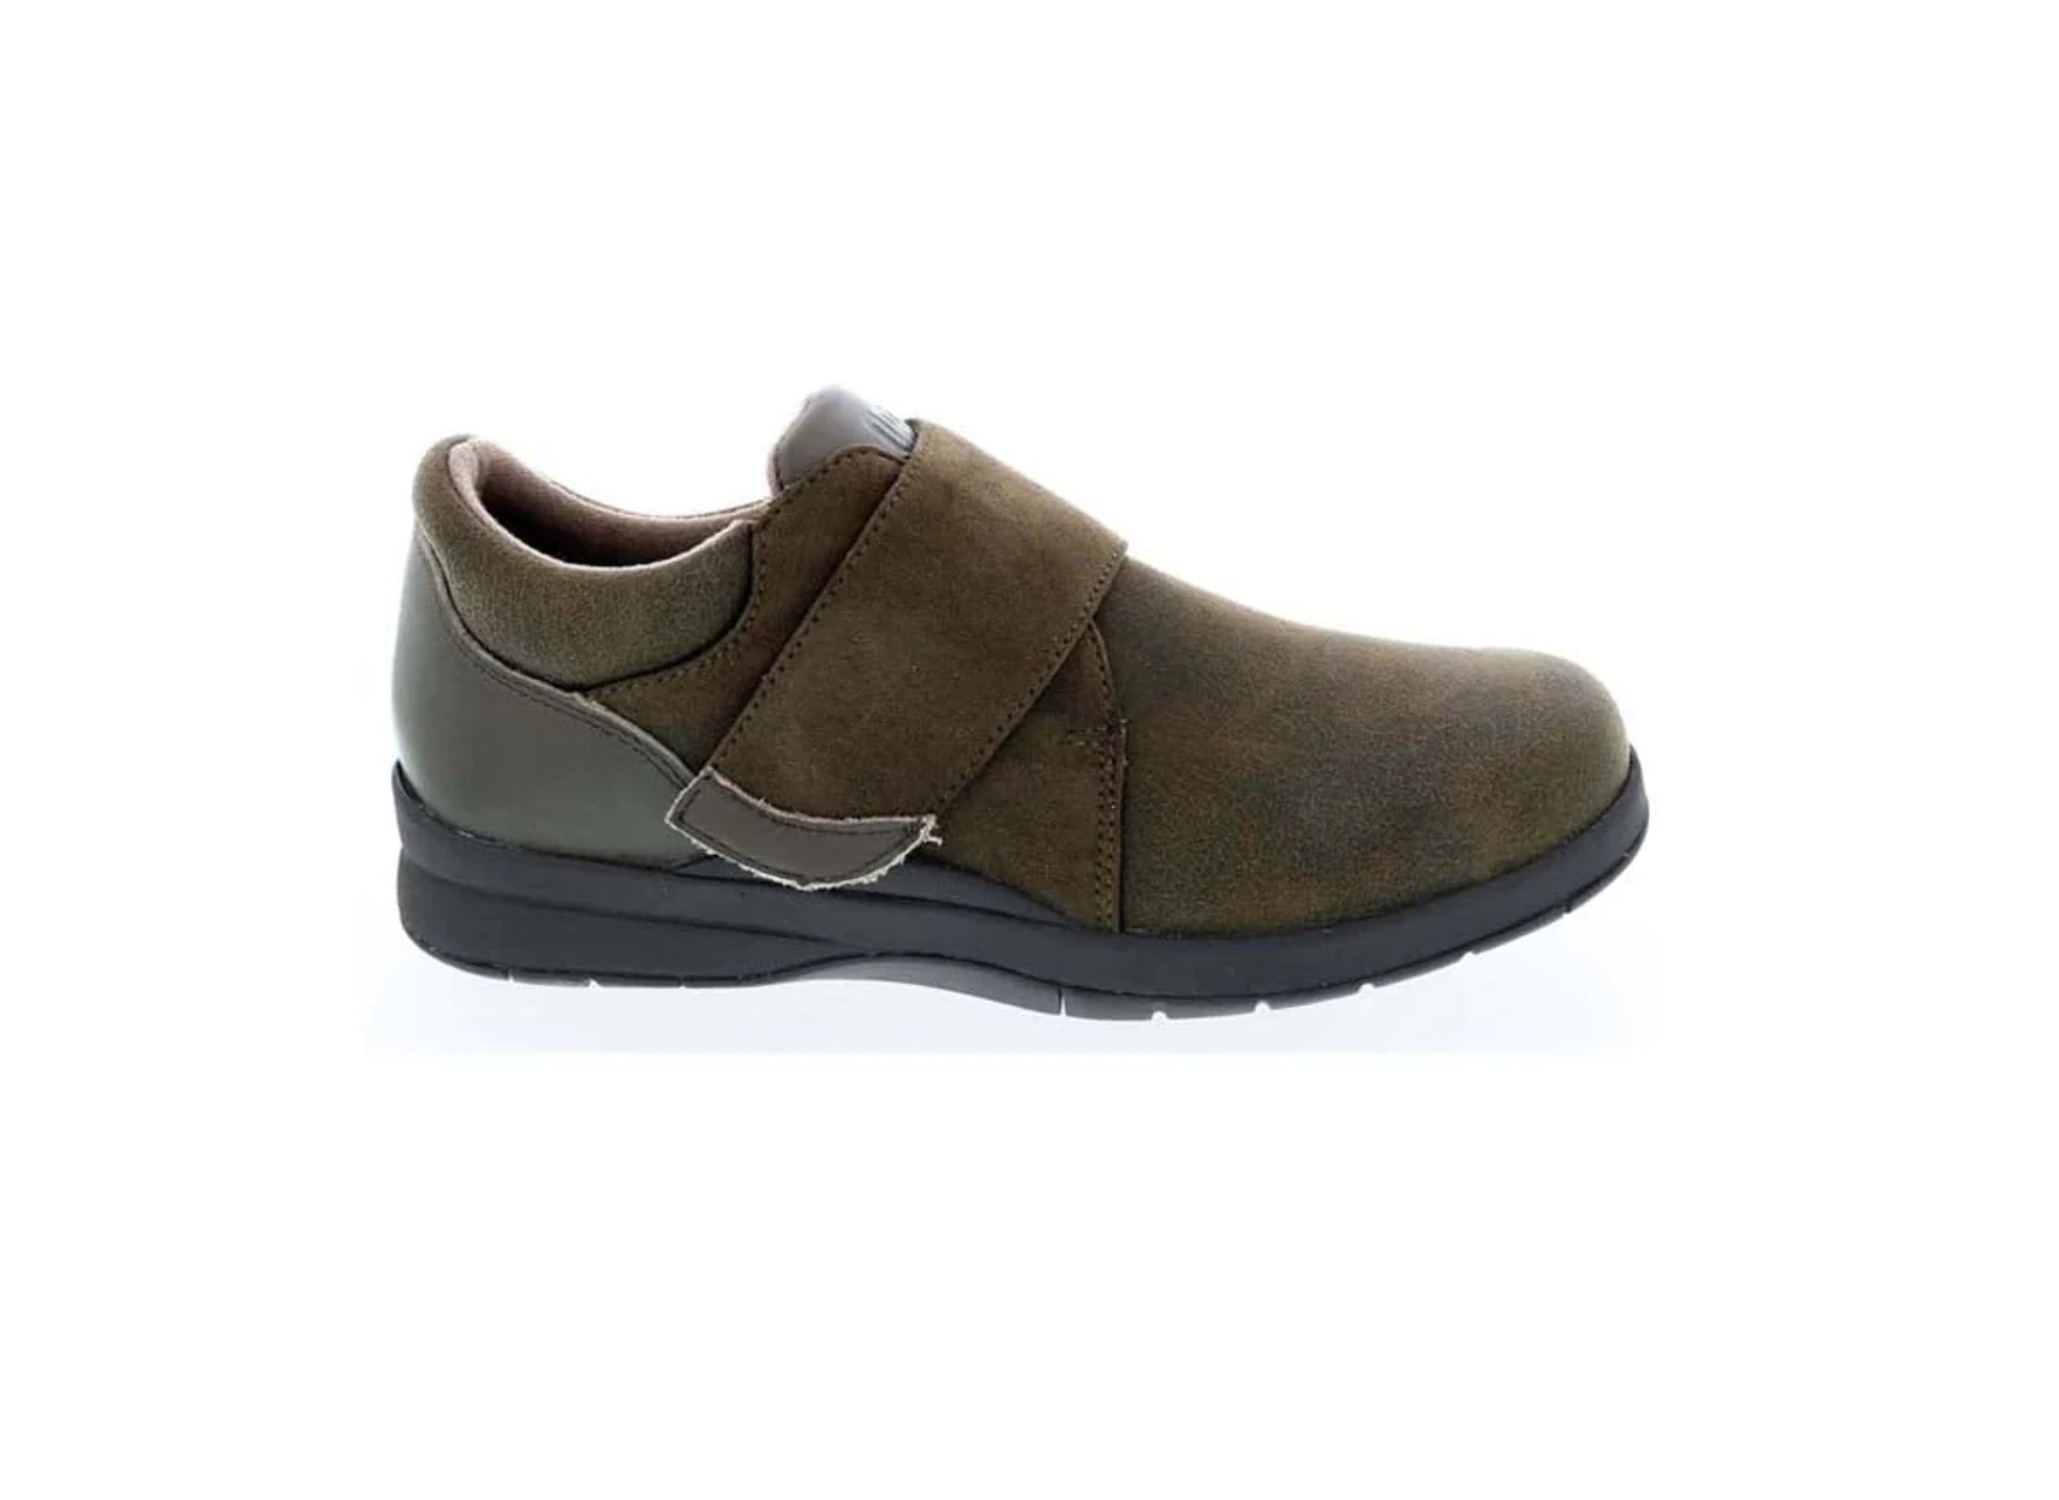 DREW MOONWALK WOMEN CASUAL SHOE IN OLIVE STRETCH LEATHER - image 4 of 4